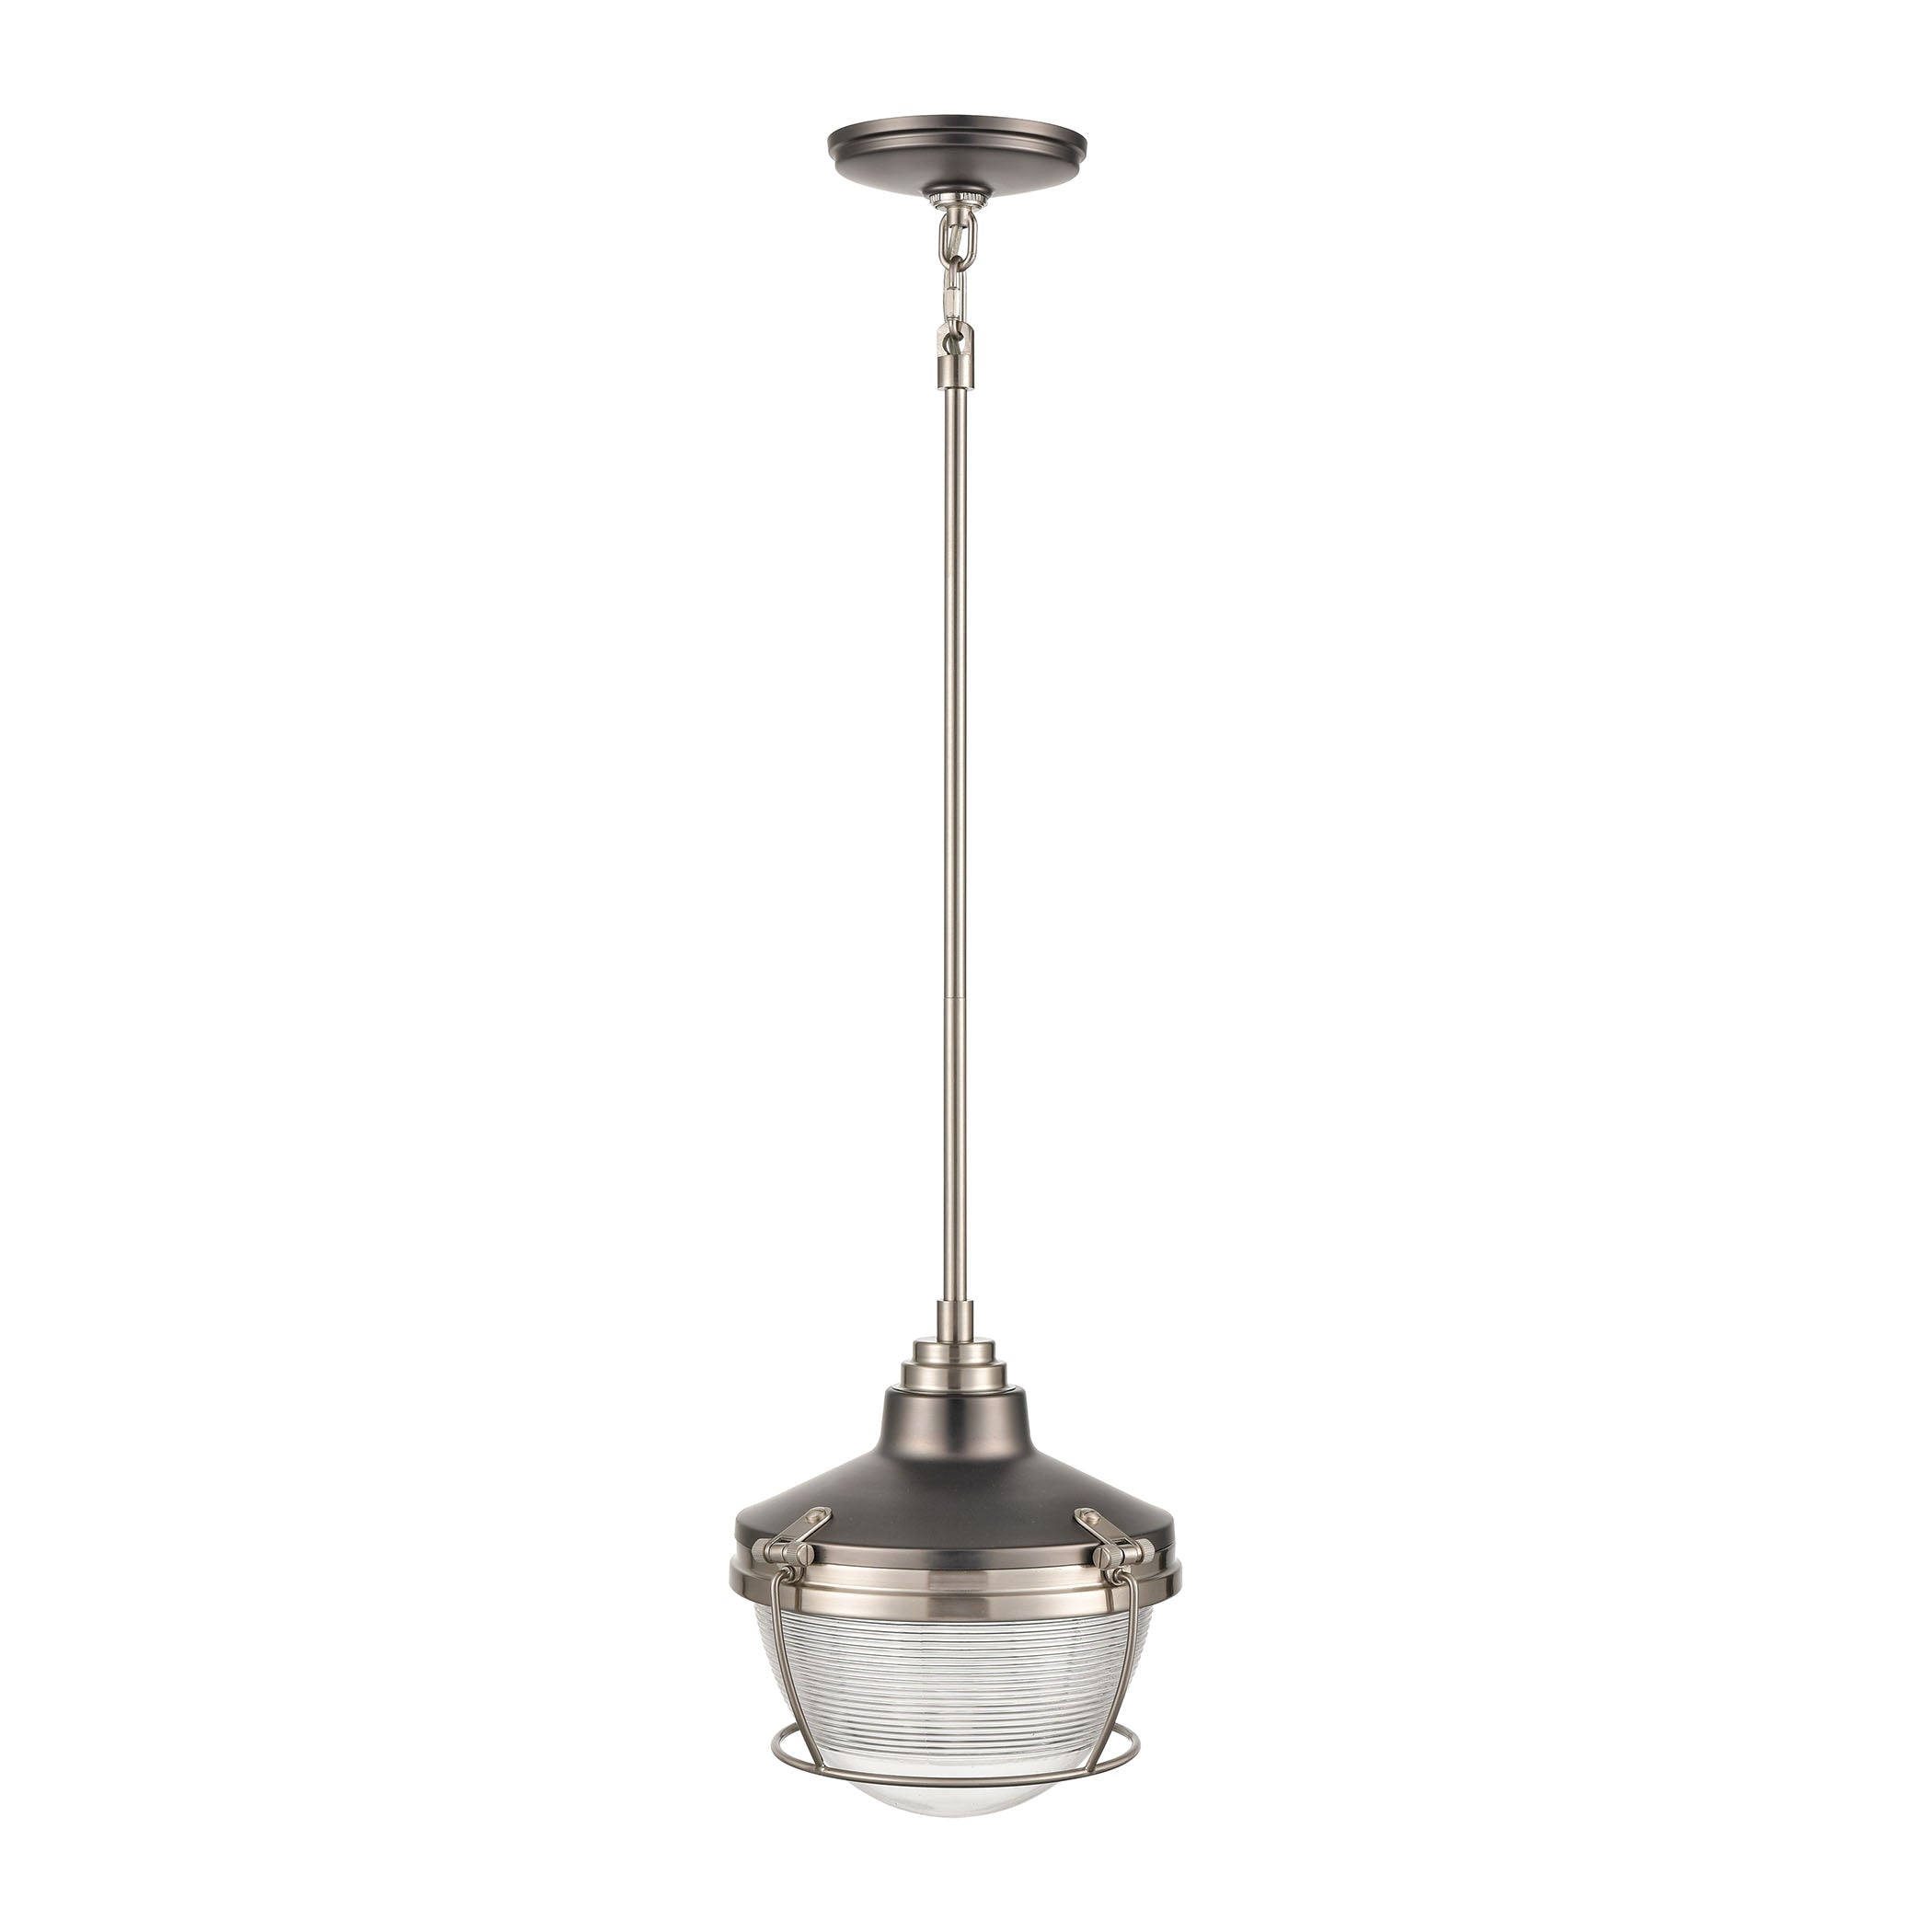 ELK Lighting 16515/1 Seaway Passage 1-Light Mini Pendant in Black Nickel and Satin Nickel with Clear Ribbed Glass